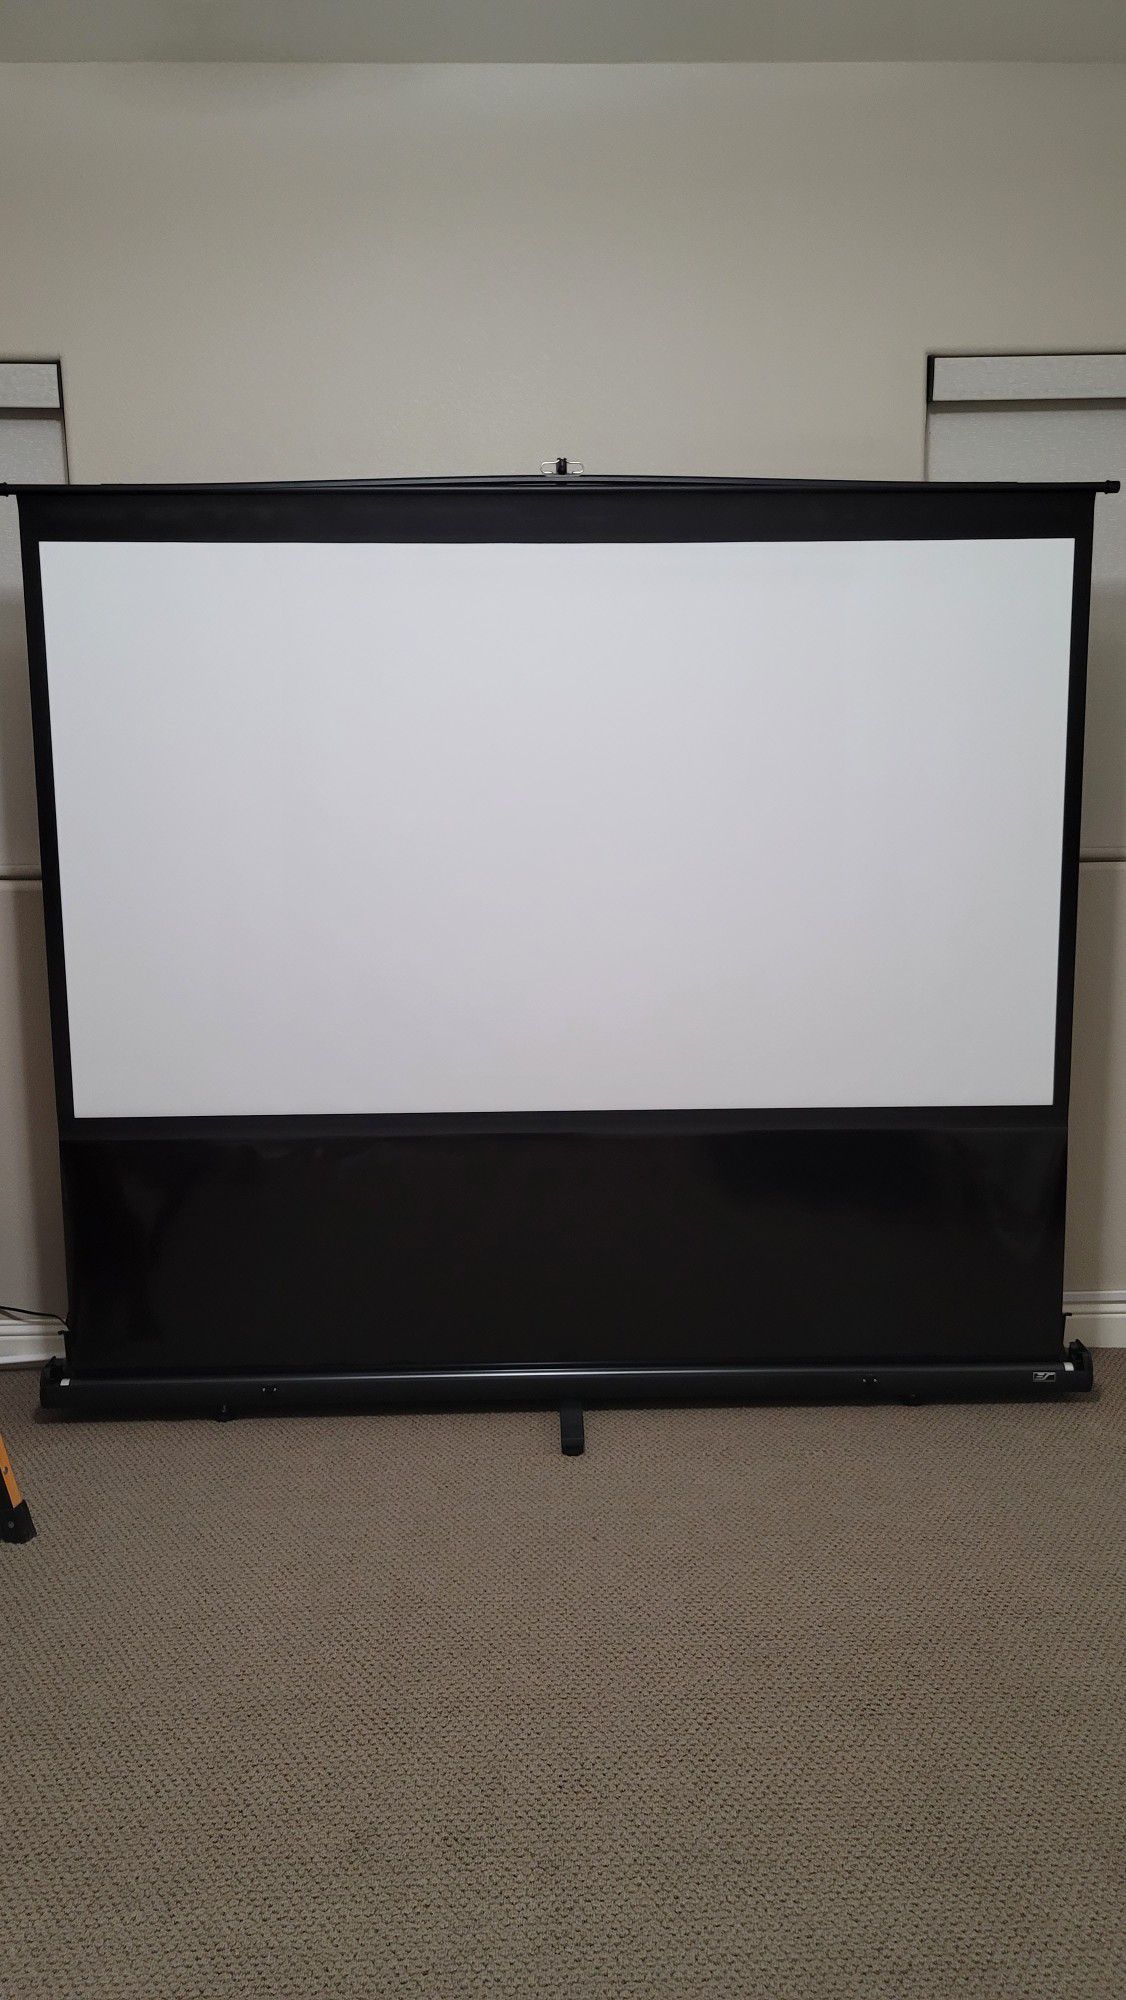 100" projector screen (Elite Screens) and projector stand